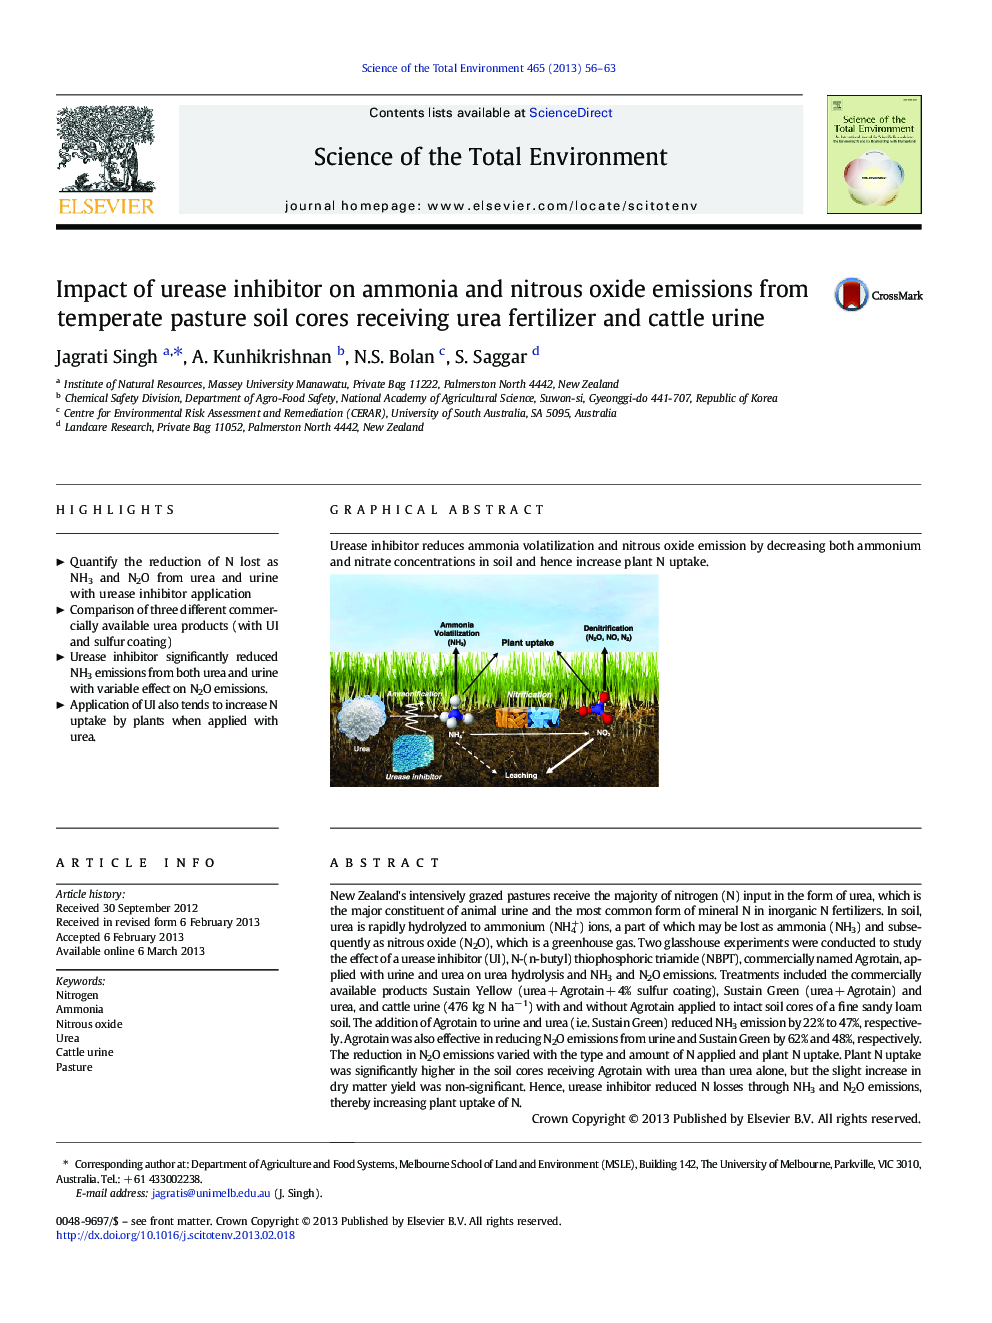 Impact of urease inhibitor on ammonia and nitrous oxide emissions from temperate pasture soil cores receiving urea fertilizer and cattle urine